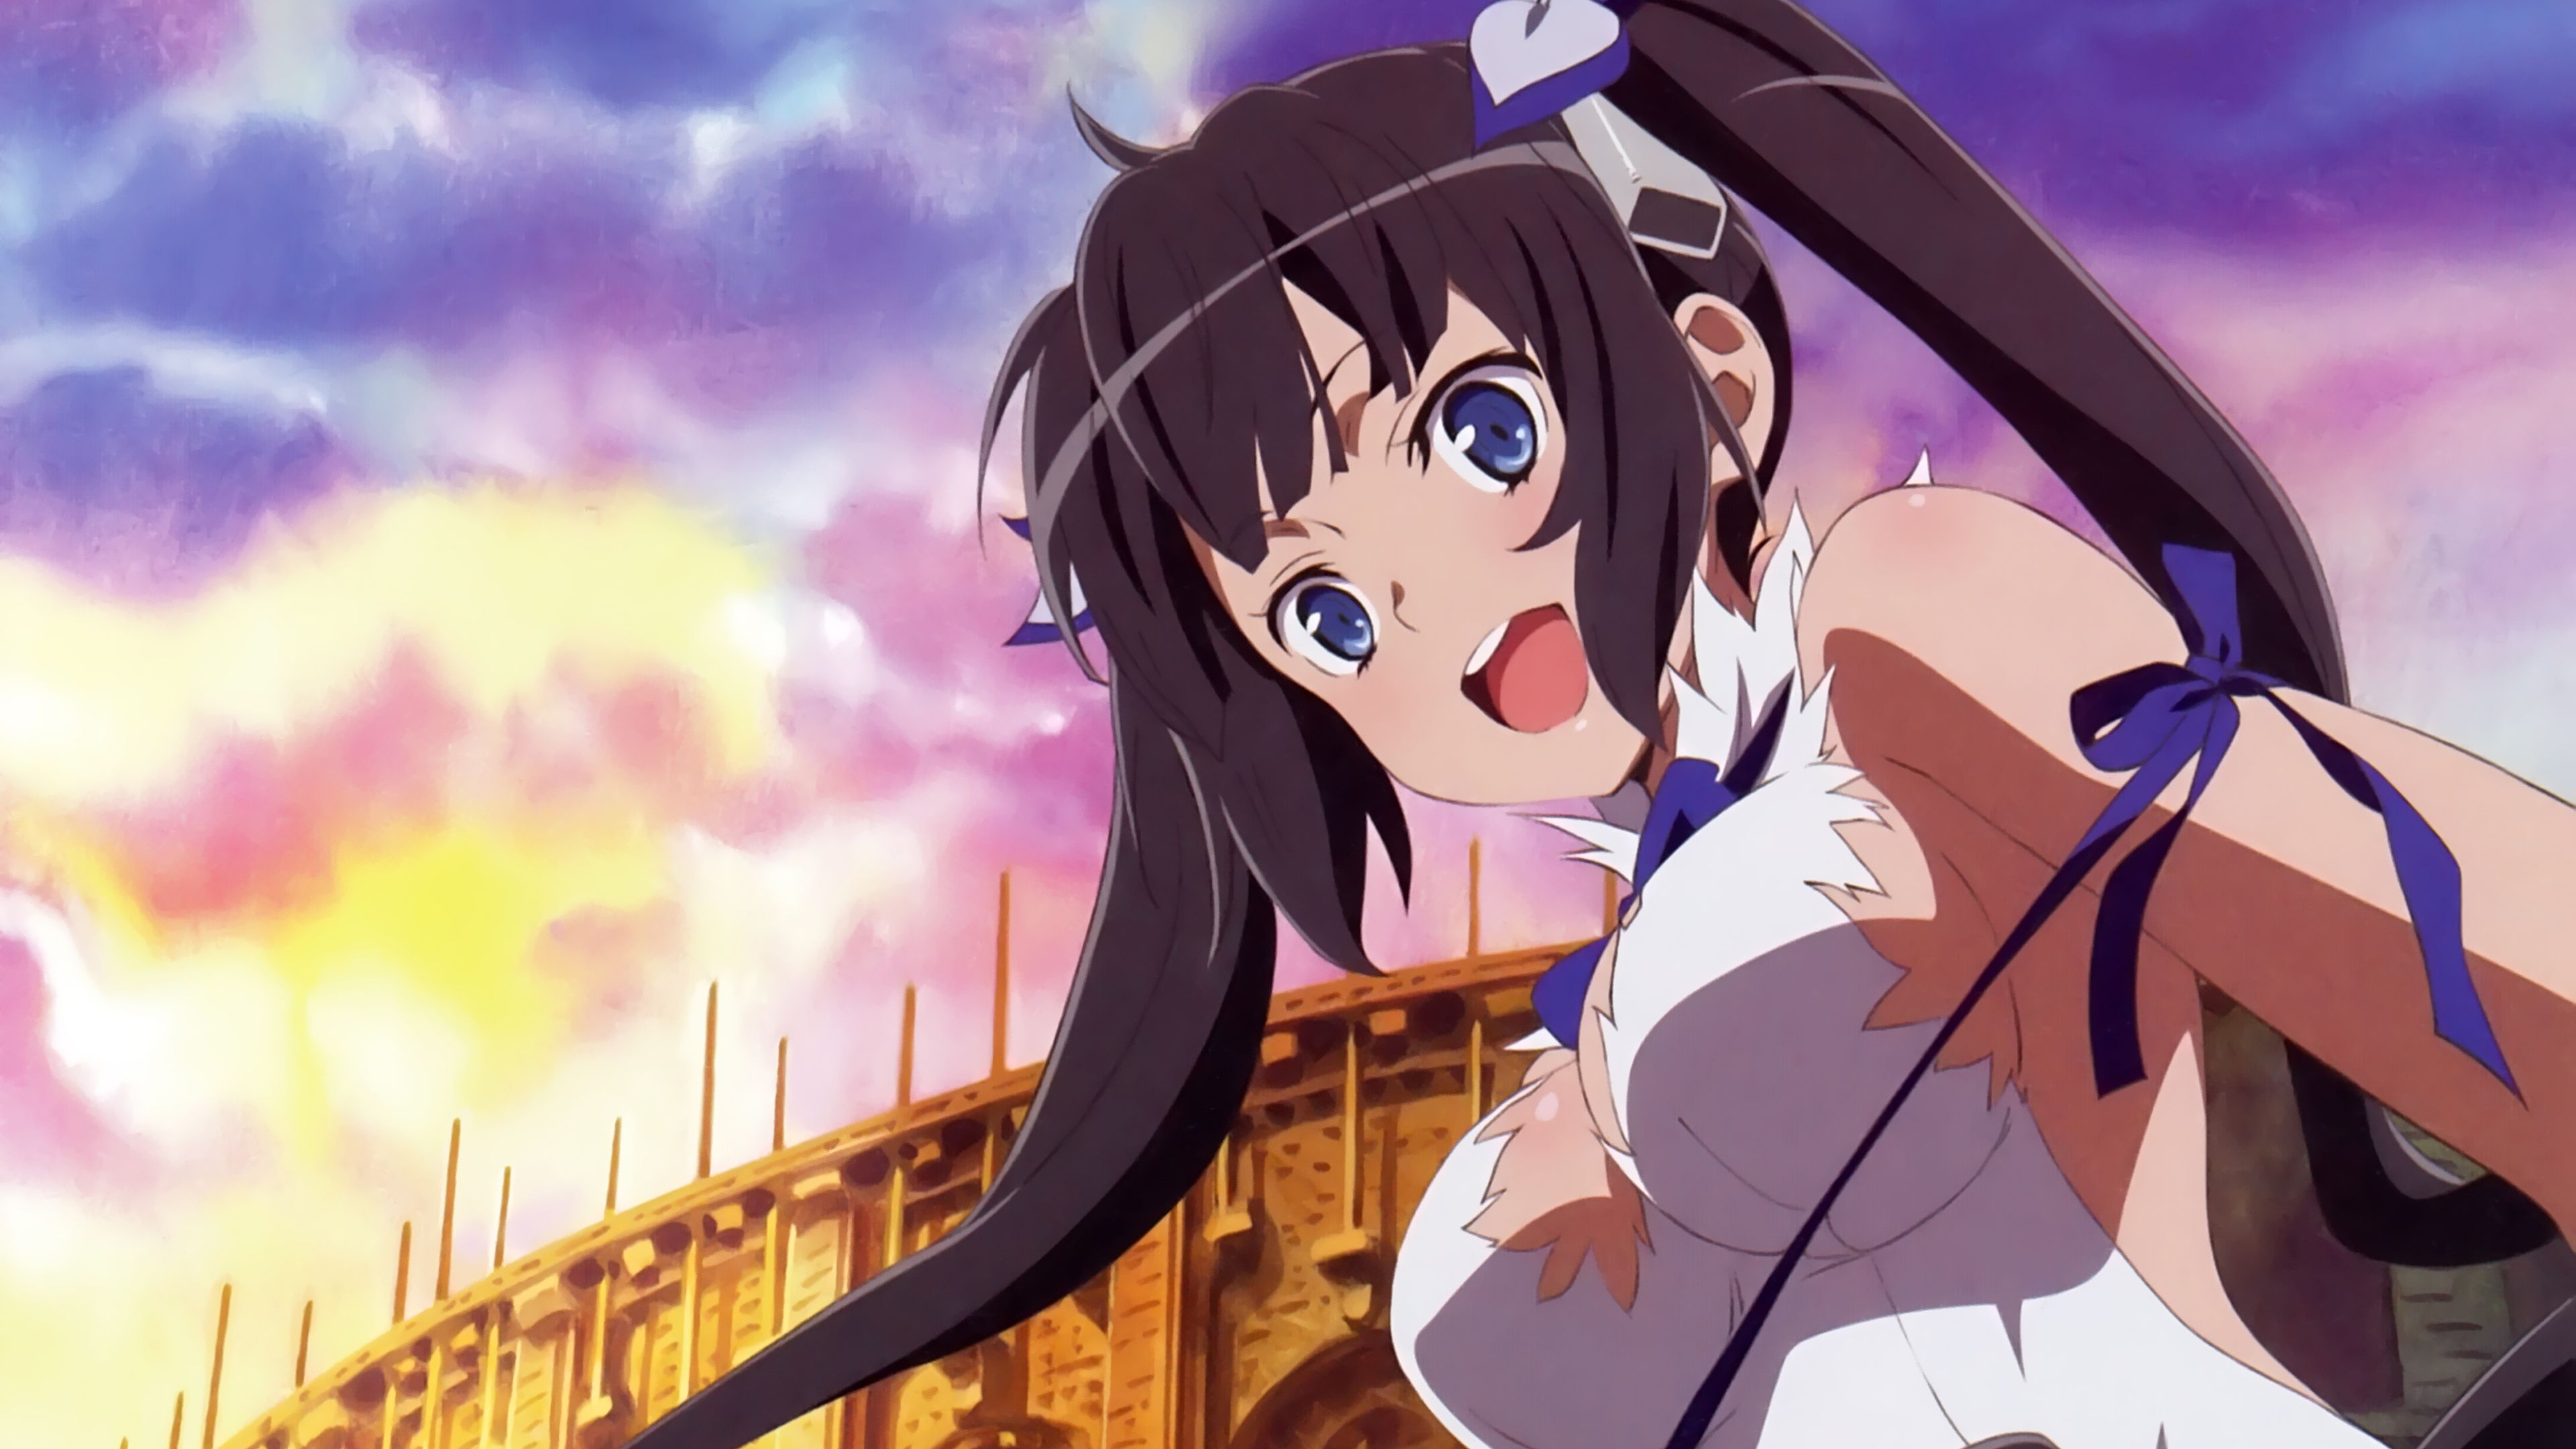 Danmachi Hestia Wallpapers posted by Samantha Anderson.